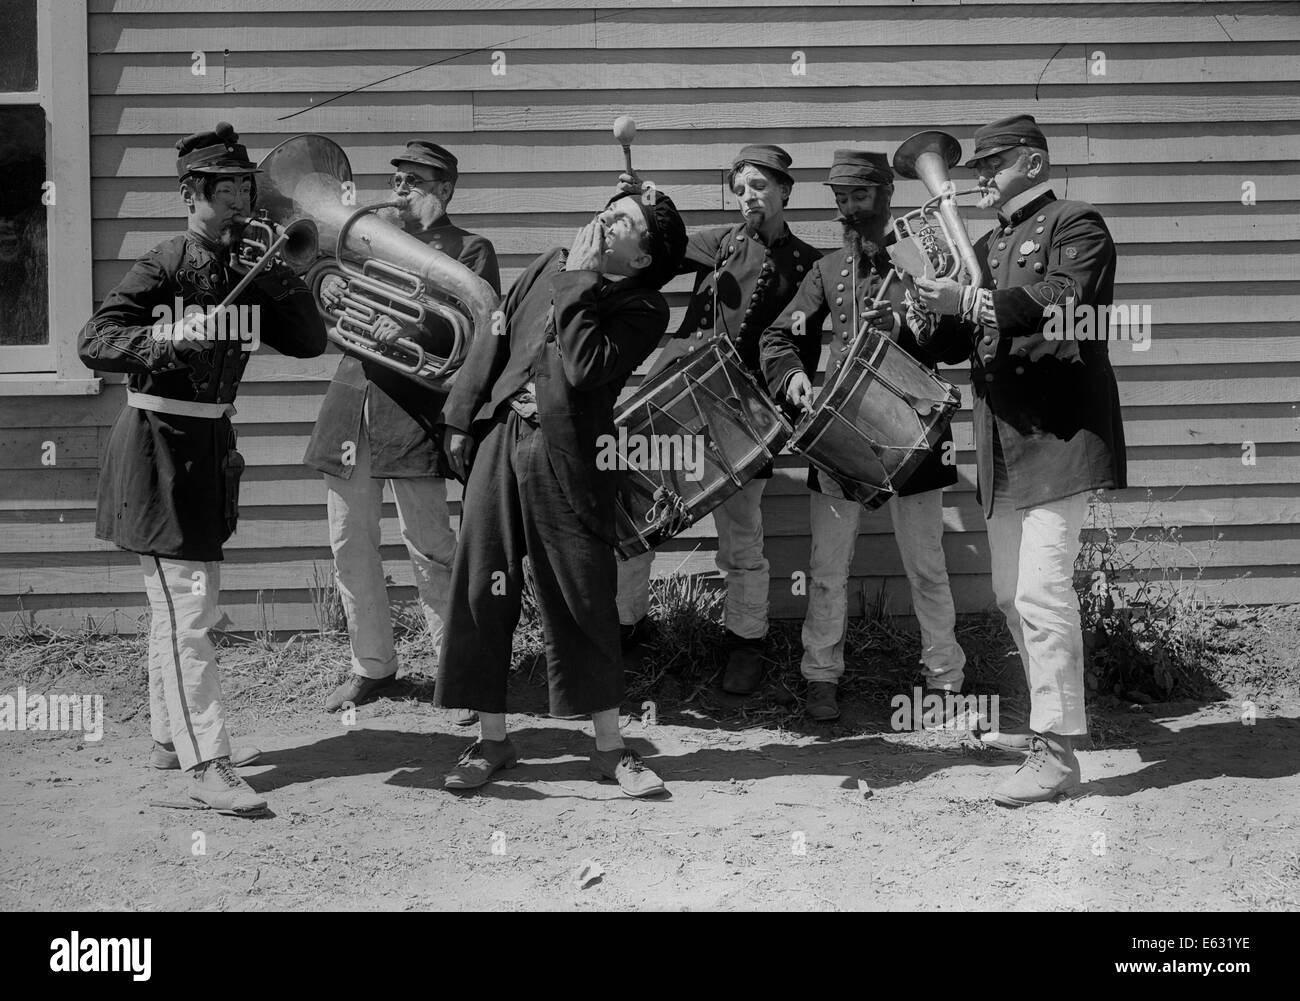 1910s 1920s FUNNY INTOXICATED MAN SINGING SURROUNDED BY MILITARY BRASS BAND SILENT MOVIE STILL Stock Photo